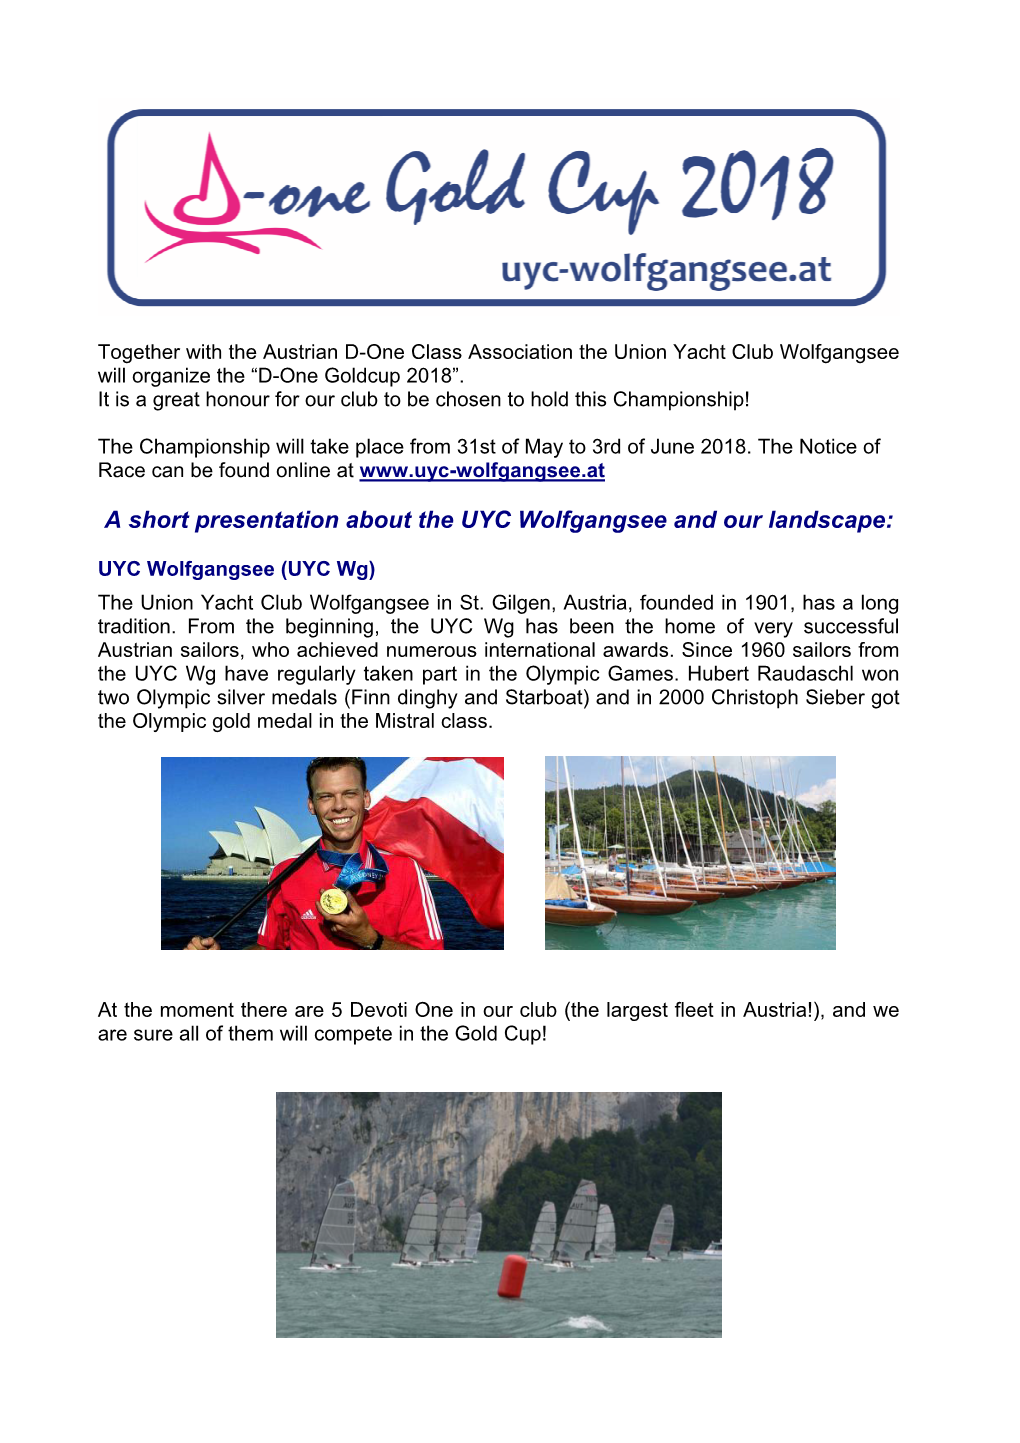 A Short Presentation About the UYC Wolfgangsee and Our Landscape